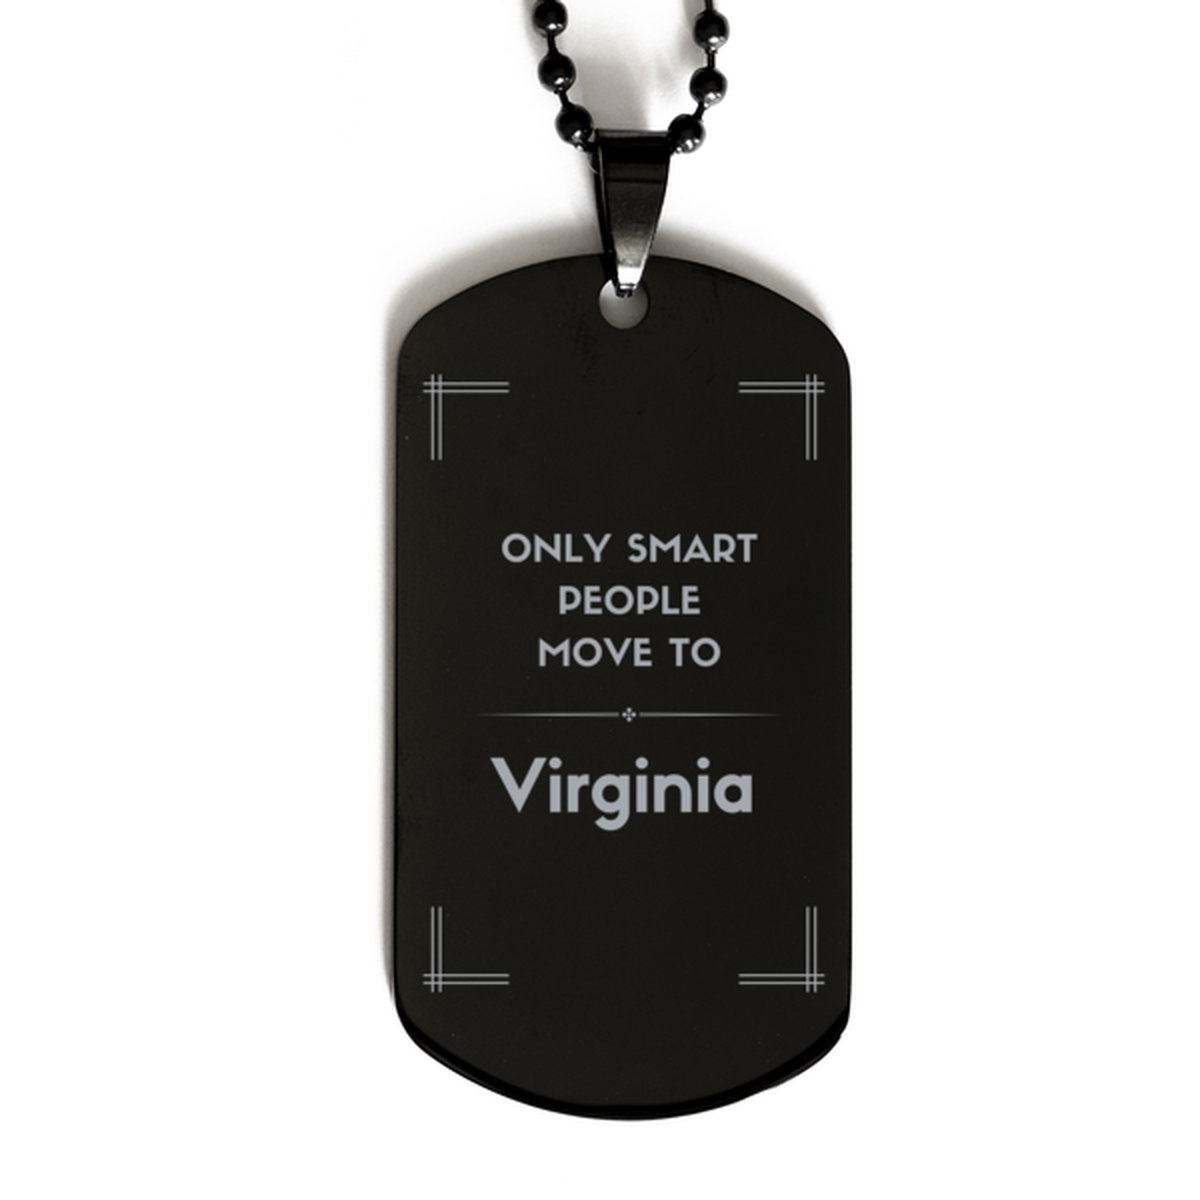 Only smart people move to Virginia Black Dog Tag, Gag Gifts For Virginia, Move to Virginia Gifts for Friends Coworker Funny Saying Quote